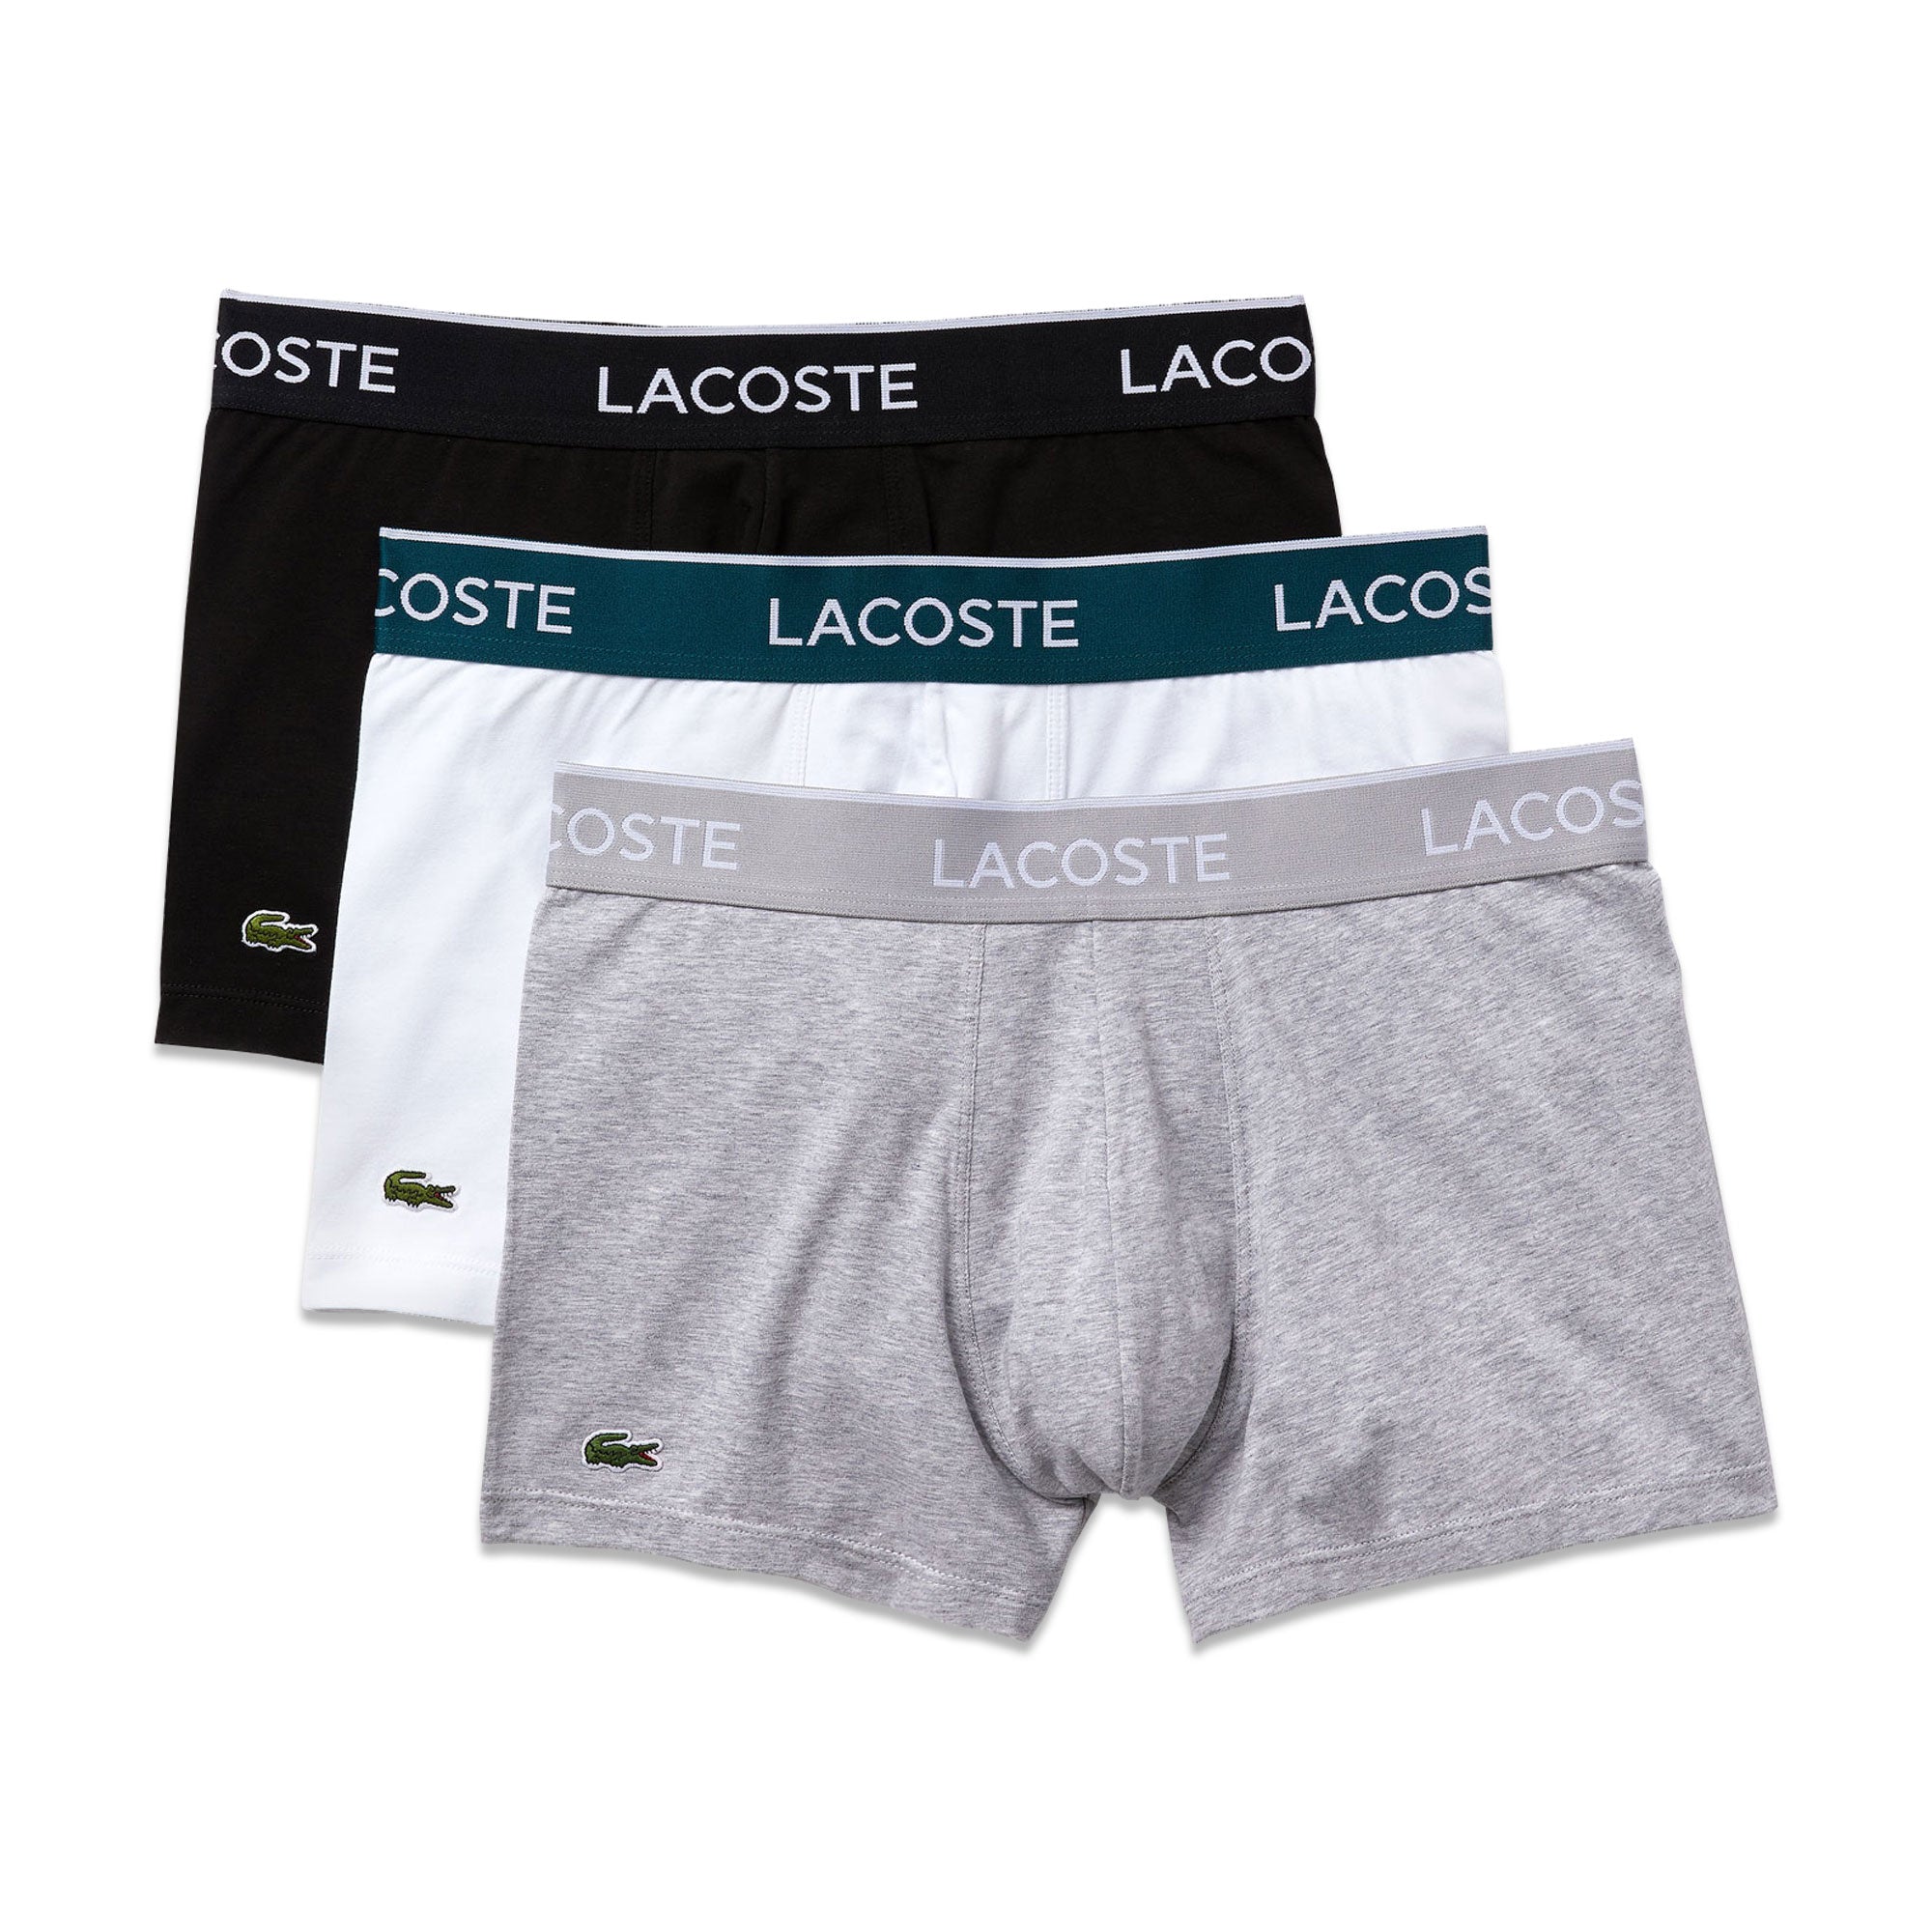 Lacoste 3 Pack Cotton Stretch Trunks - Navy/White/Stripe